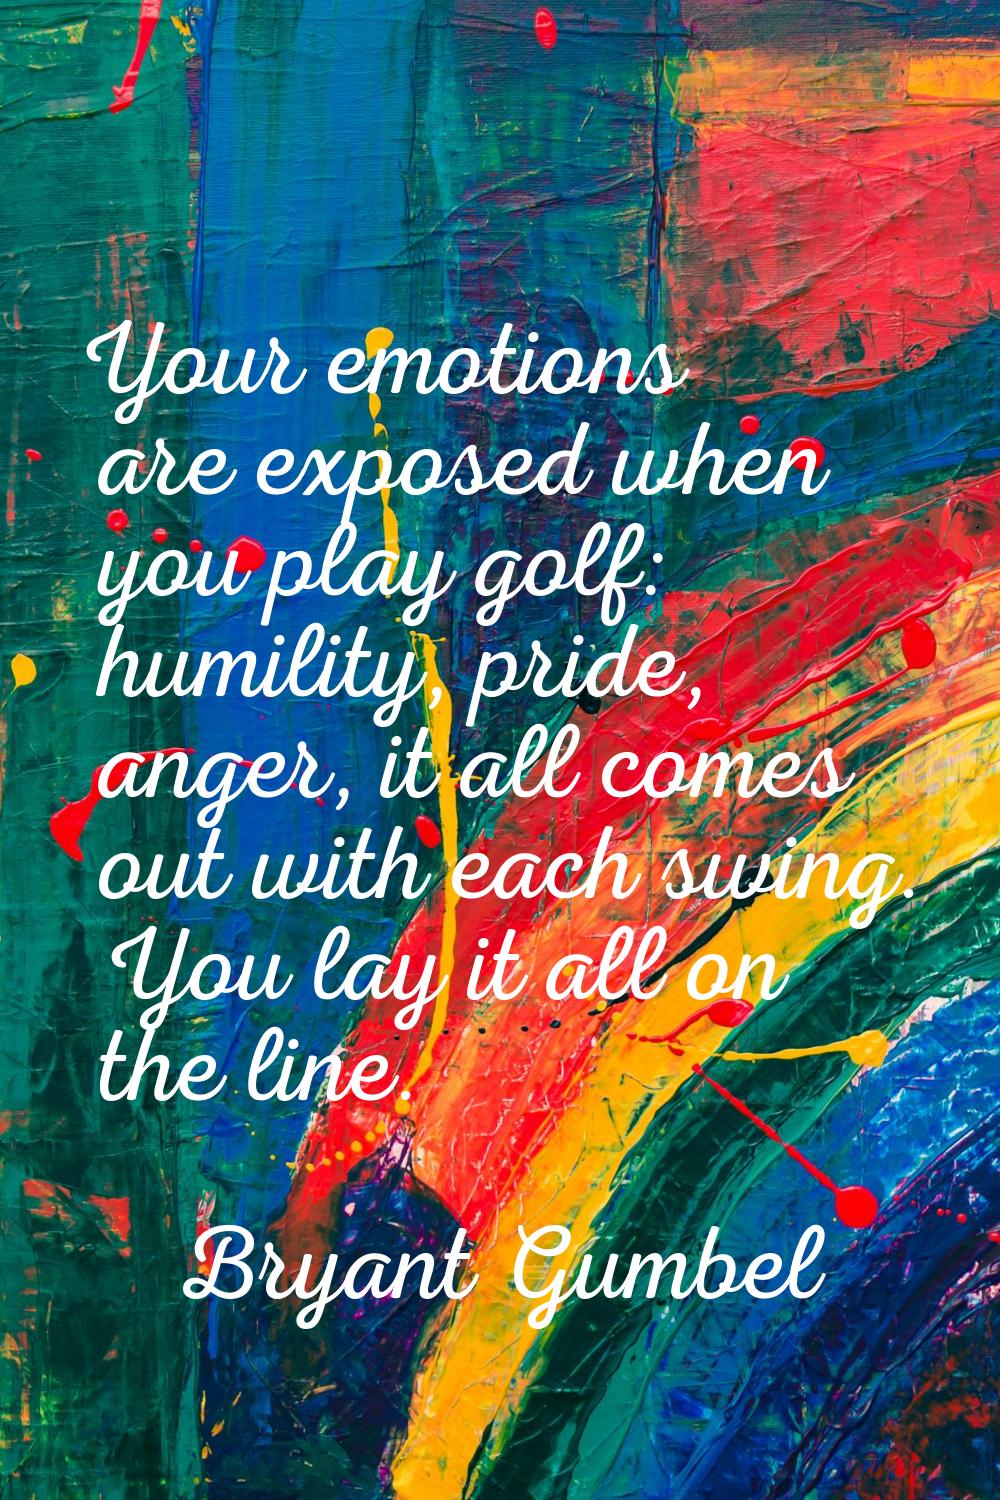 Your emotions are exposed when you play golf: humility, pride, anger, it all comes out with each sw